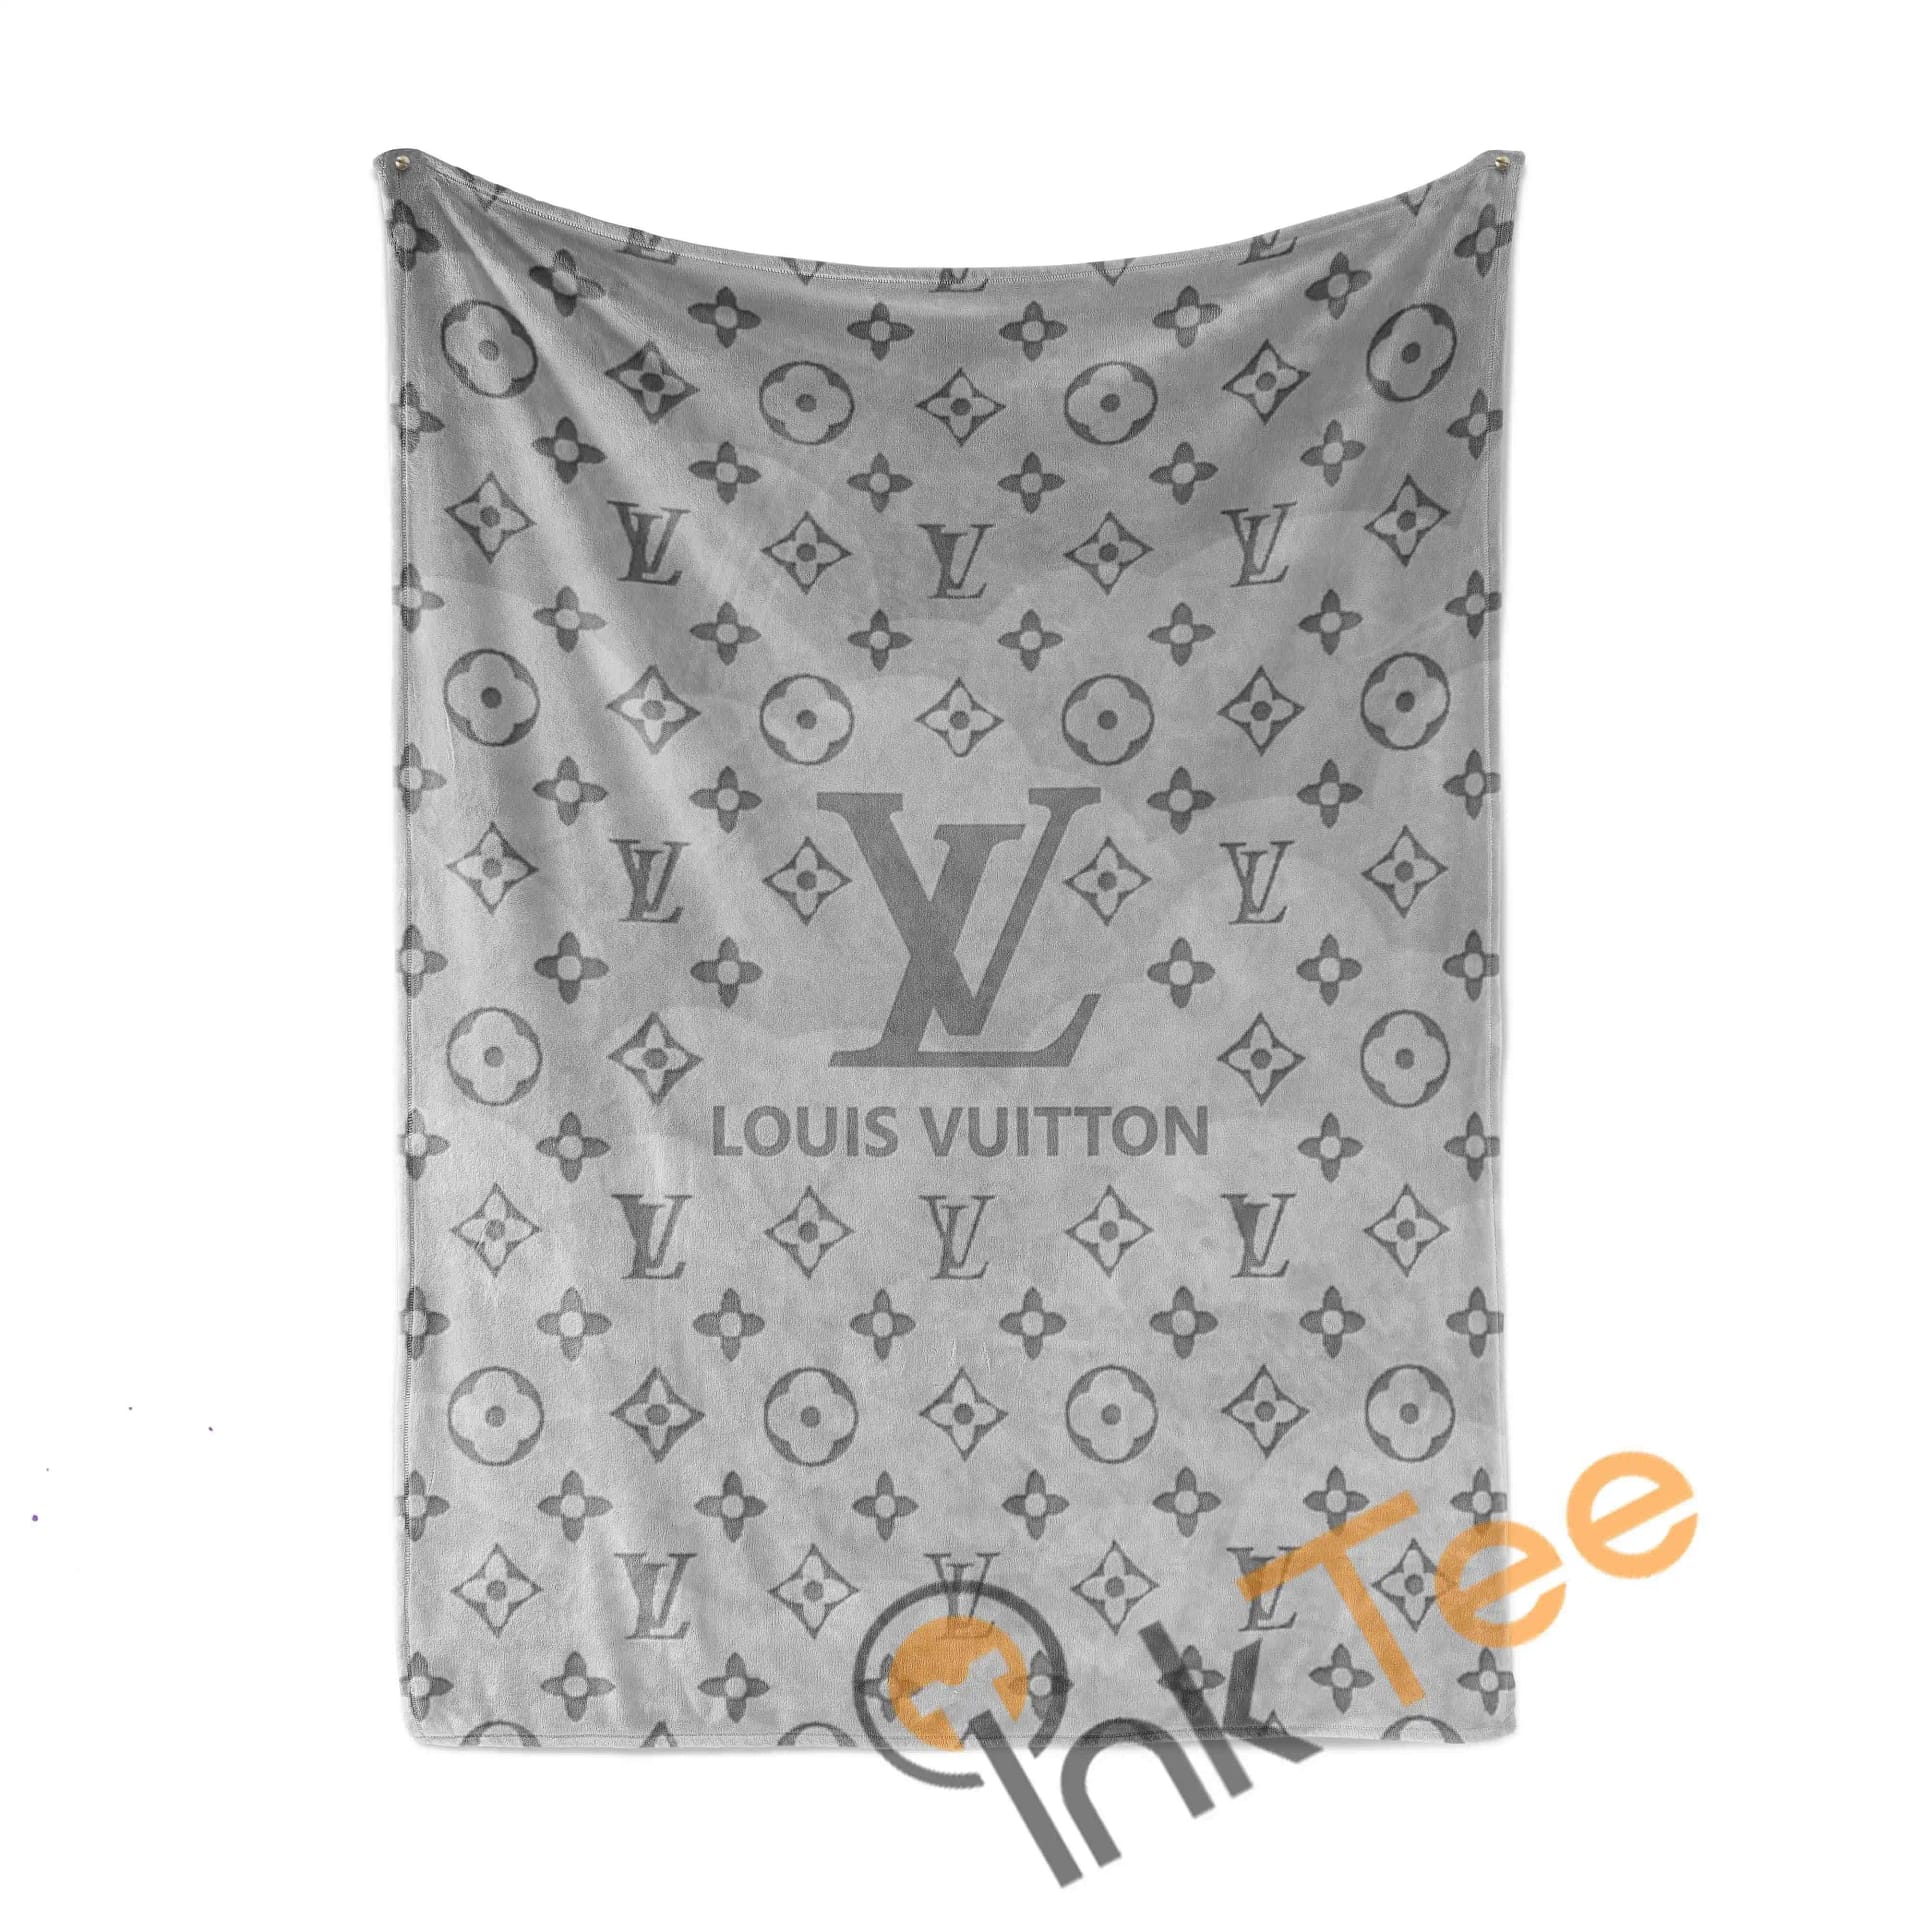 Blanket with logo louis vuitton special colors and designs version